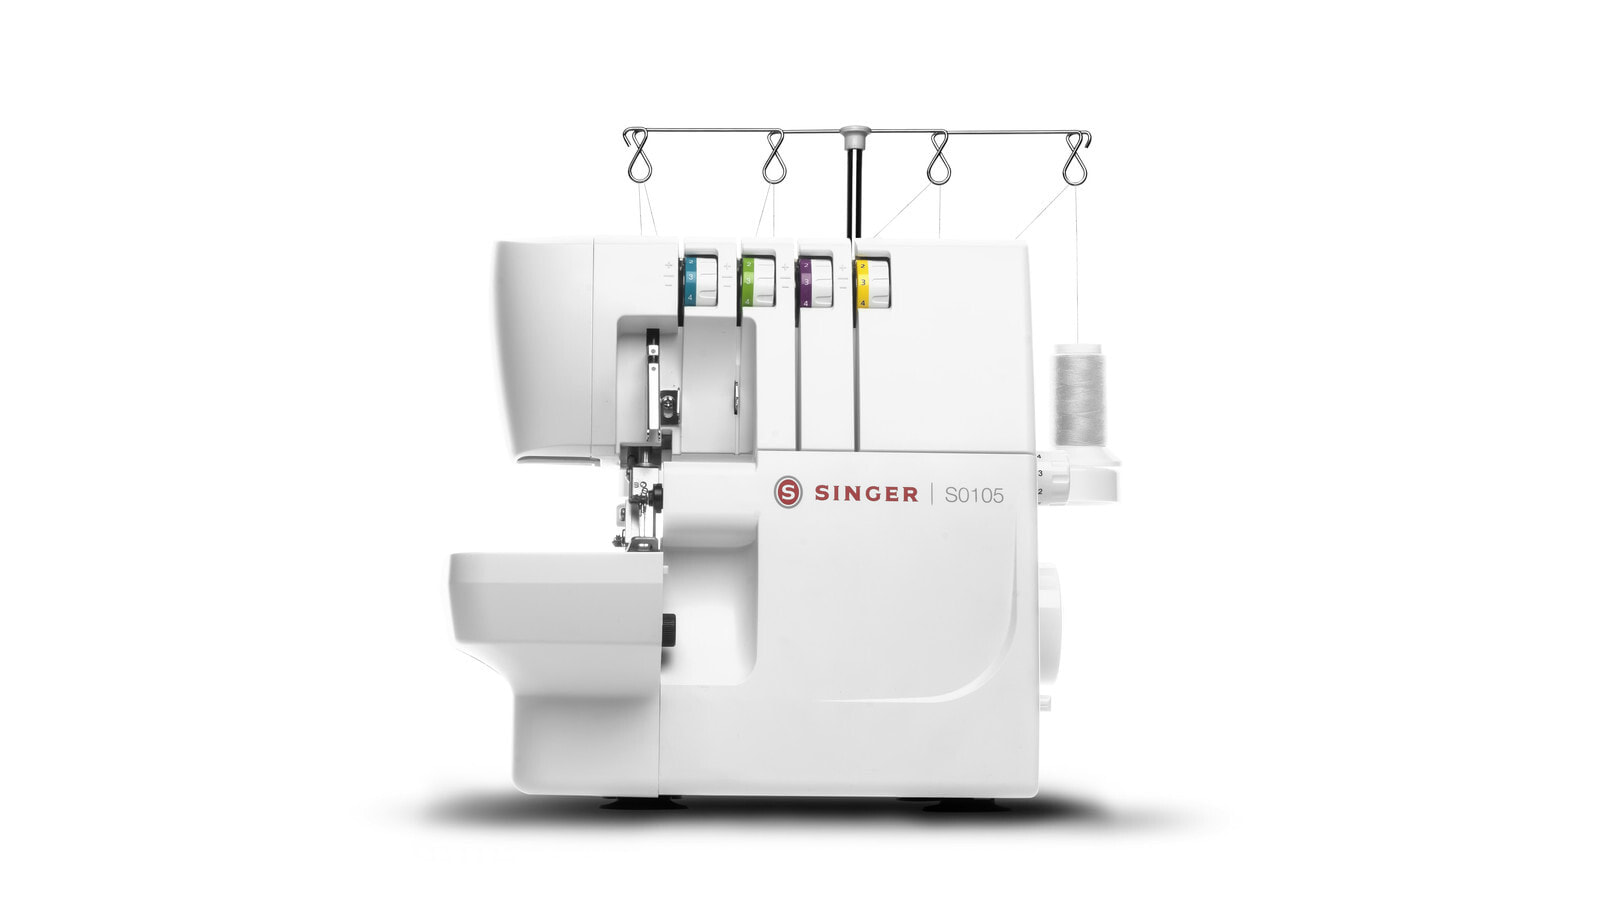 S0105 - White - Overlock sewing machine - Overlock - 1300 RPM - Variable - Electric